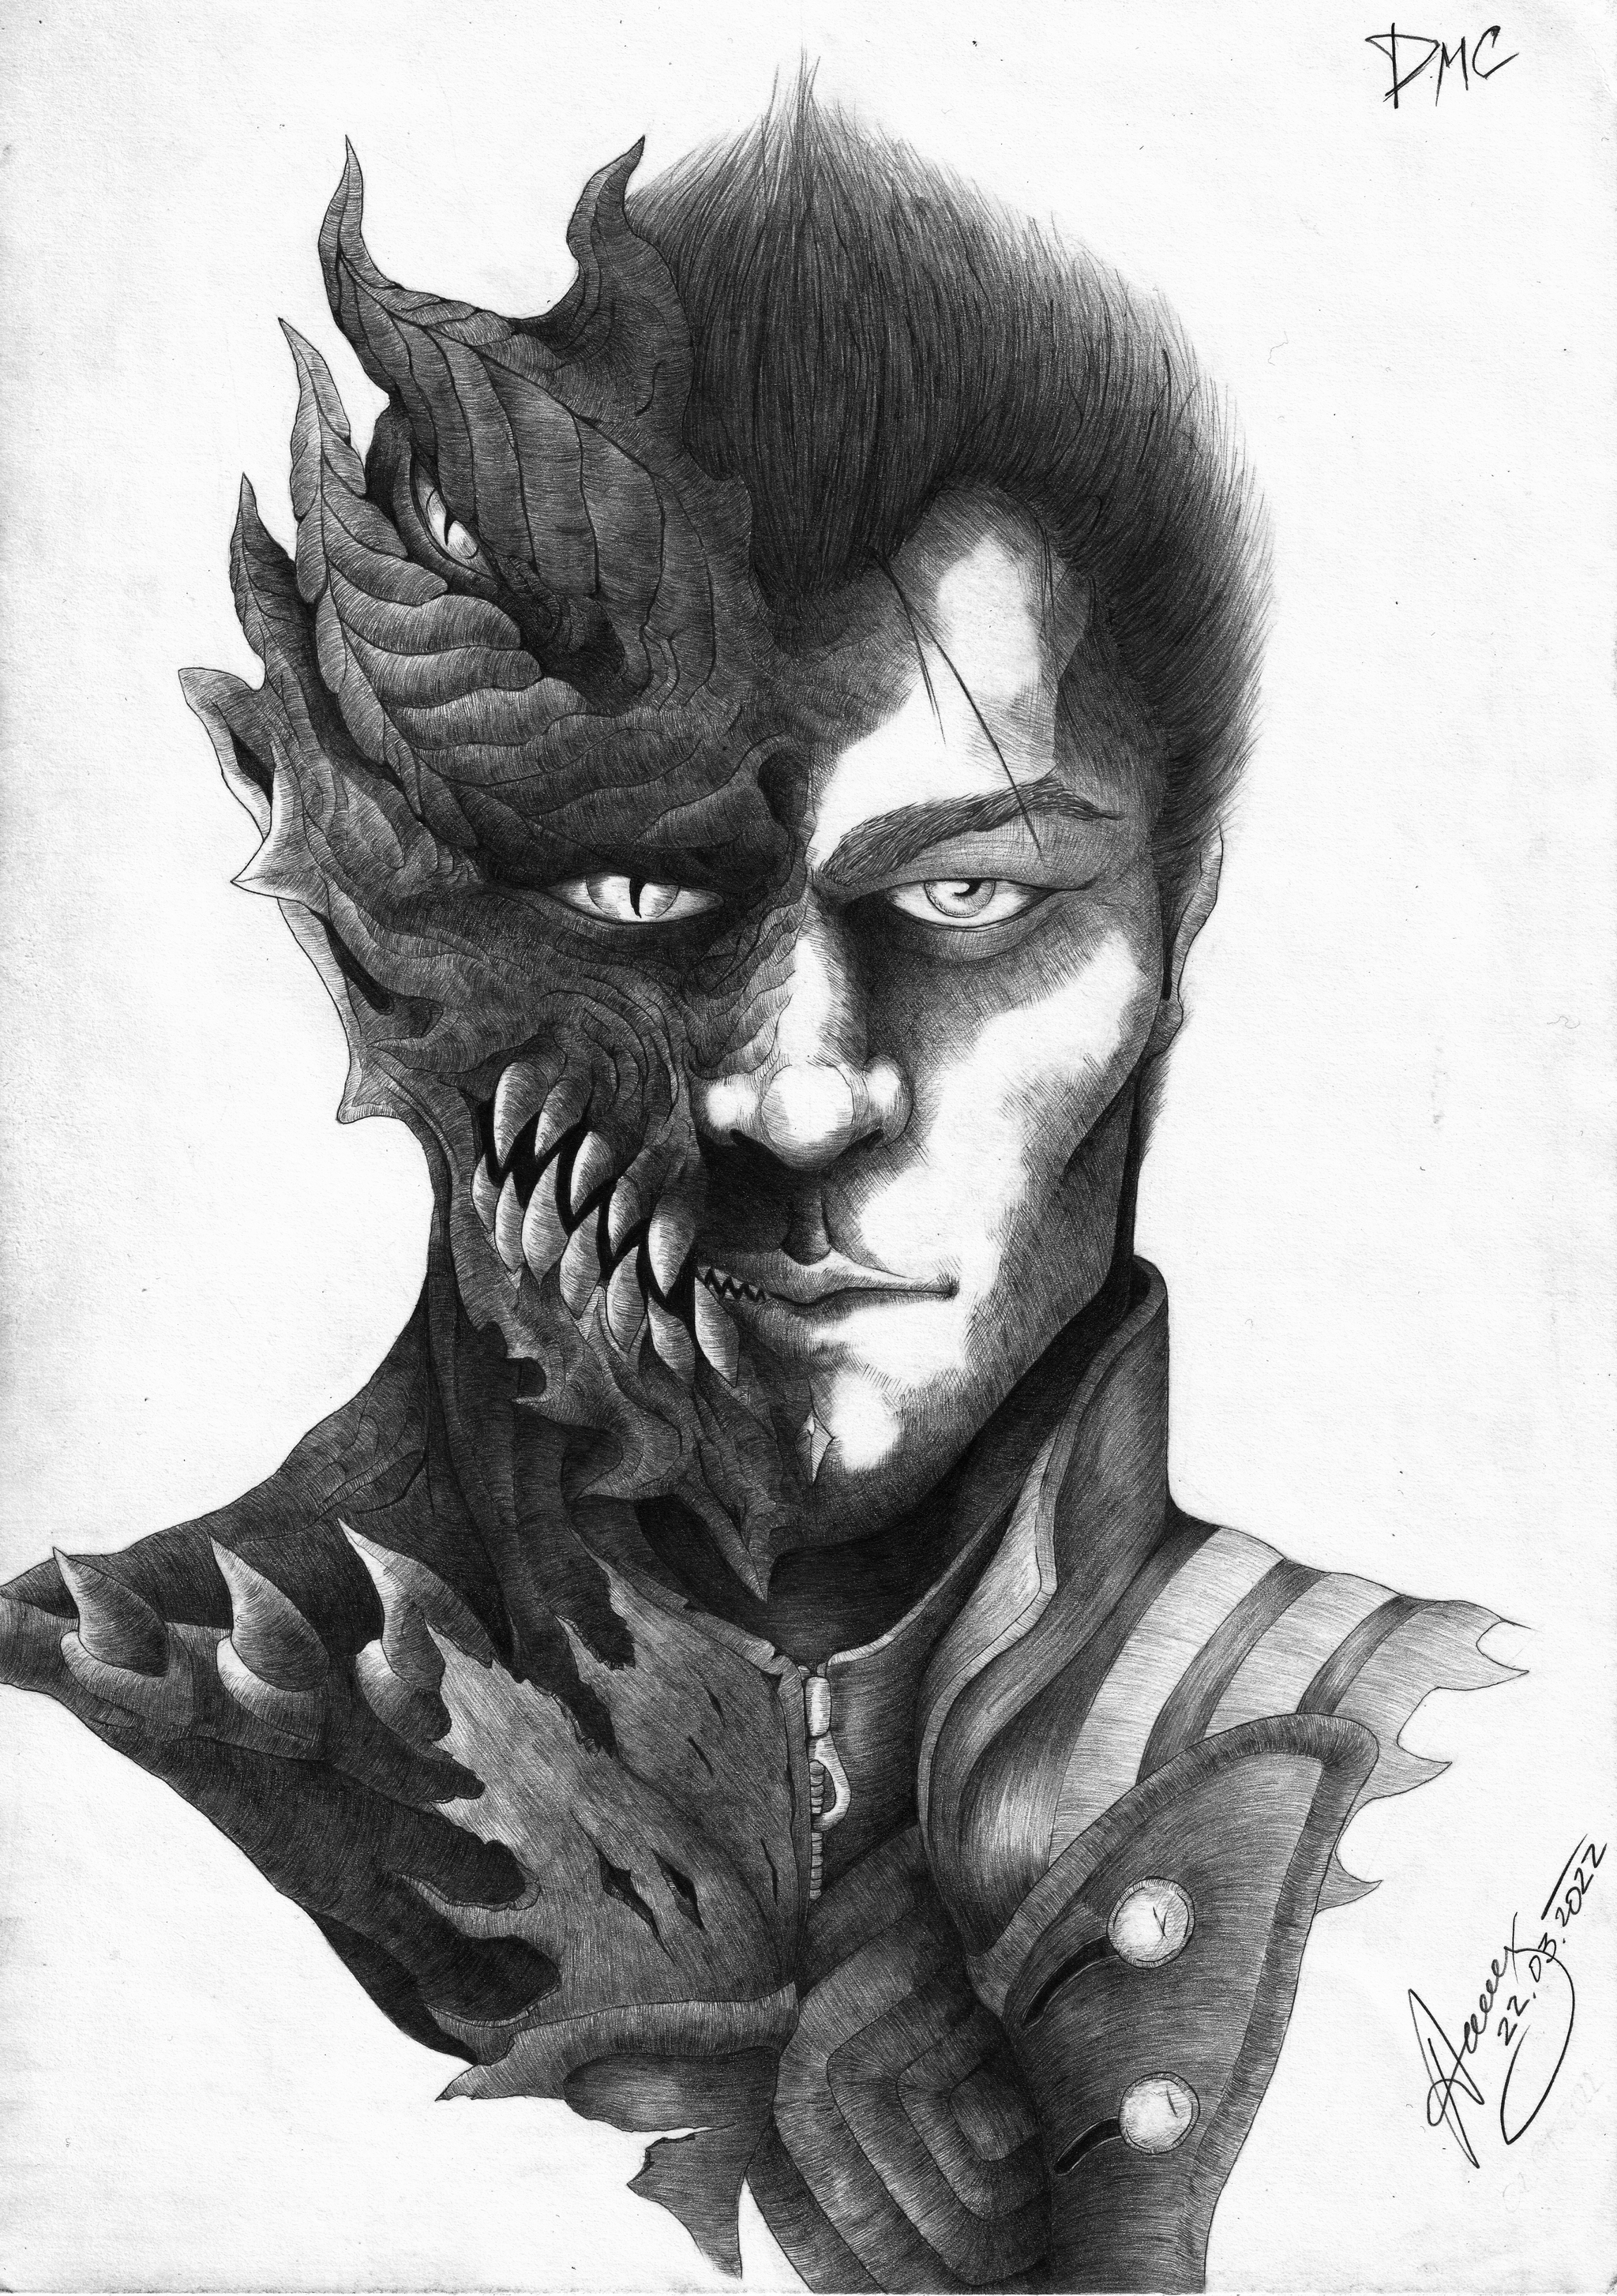 Urizen/Virgil - My, Drawing, Art, Demon, Pencil drawing, Black and white, Devil may cry 5, Game art, 